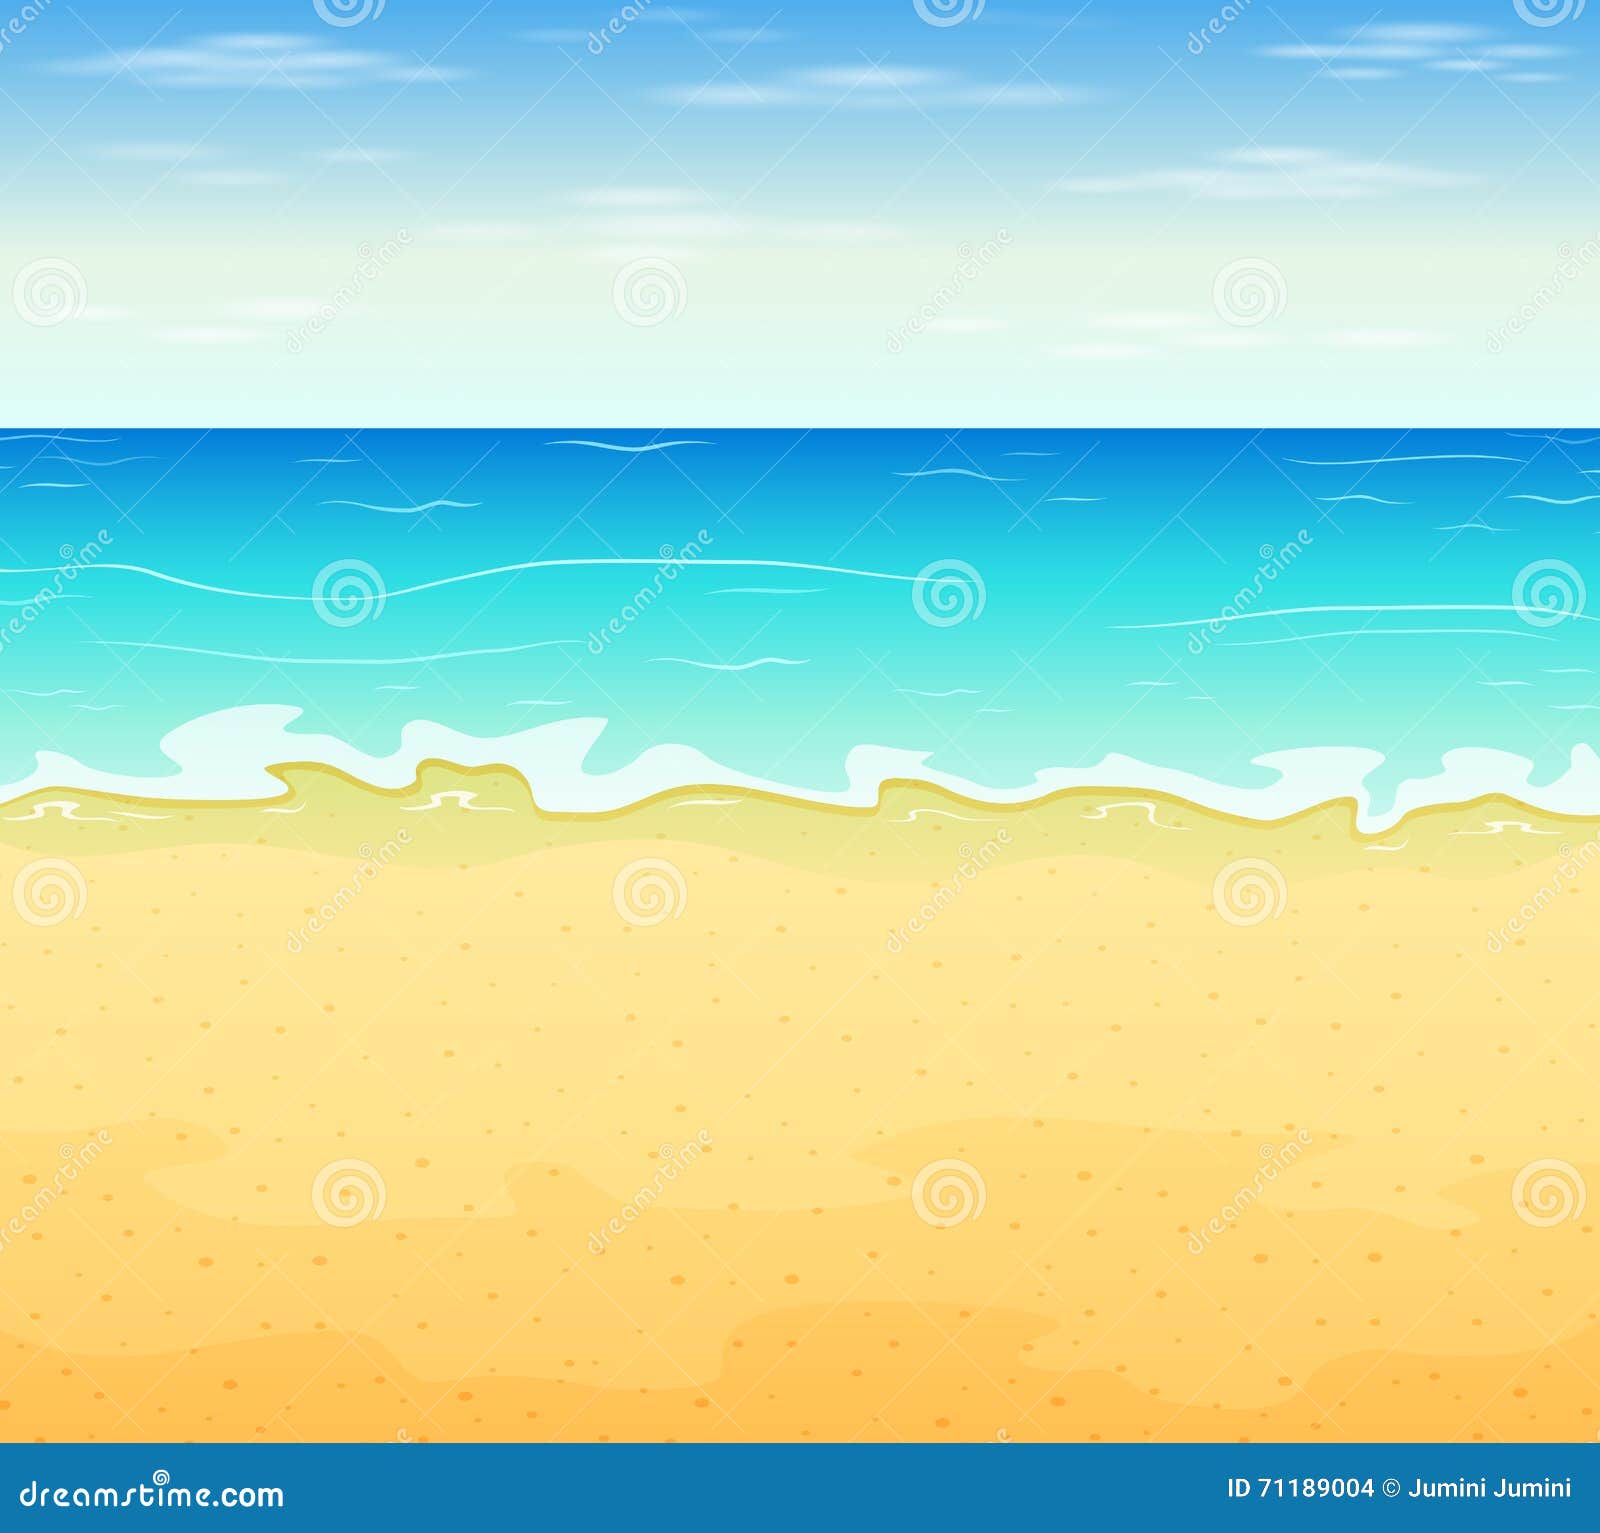 Tropical Beach With Blue Sky Stock Vector Illustration Of Blue Rest